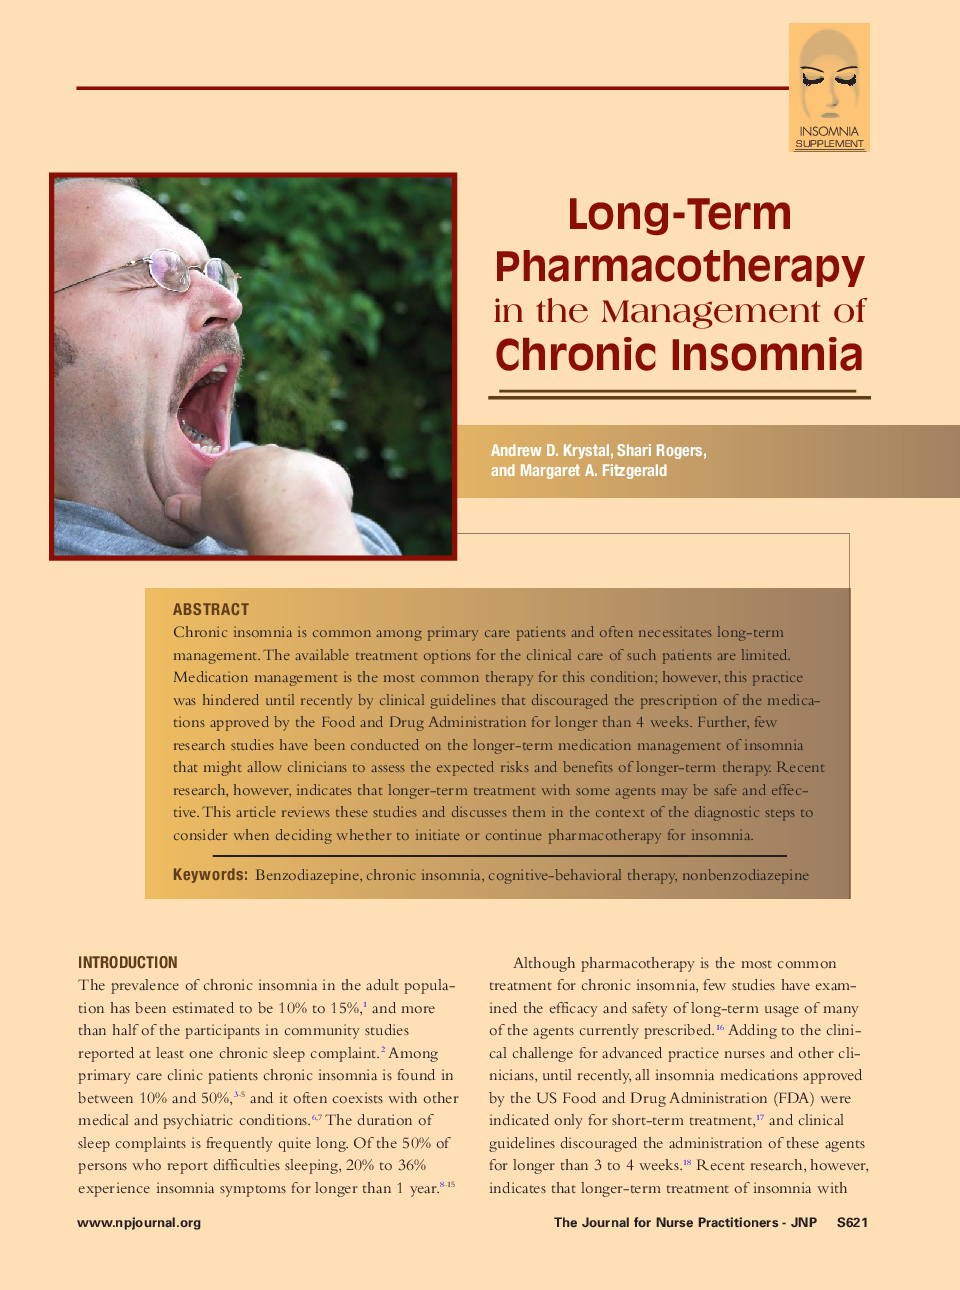 Long-Term Pharmacotherapy in the Management of Chronic Insomnia 